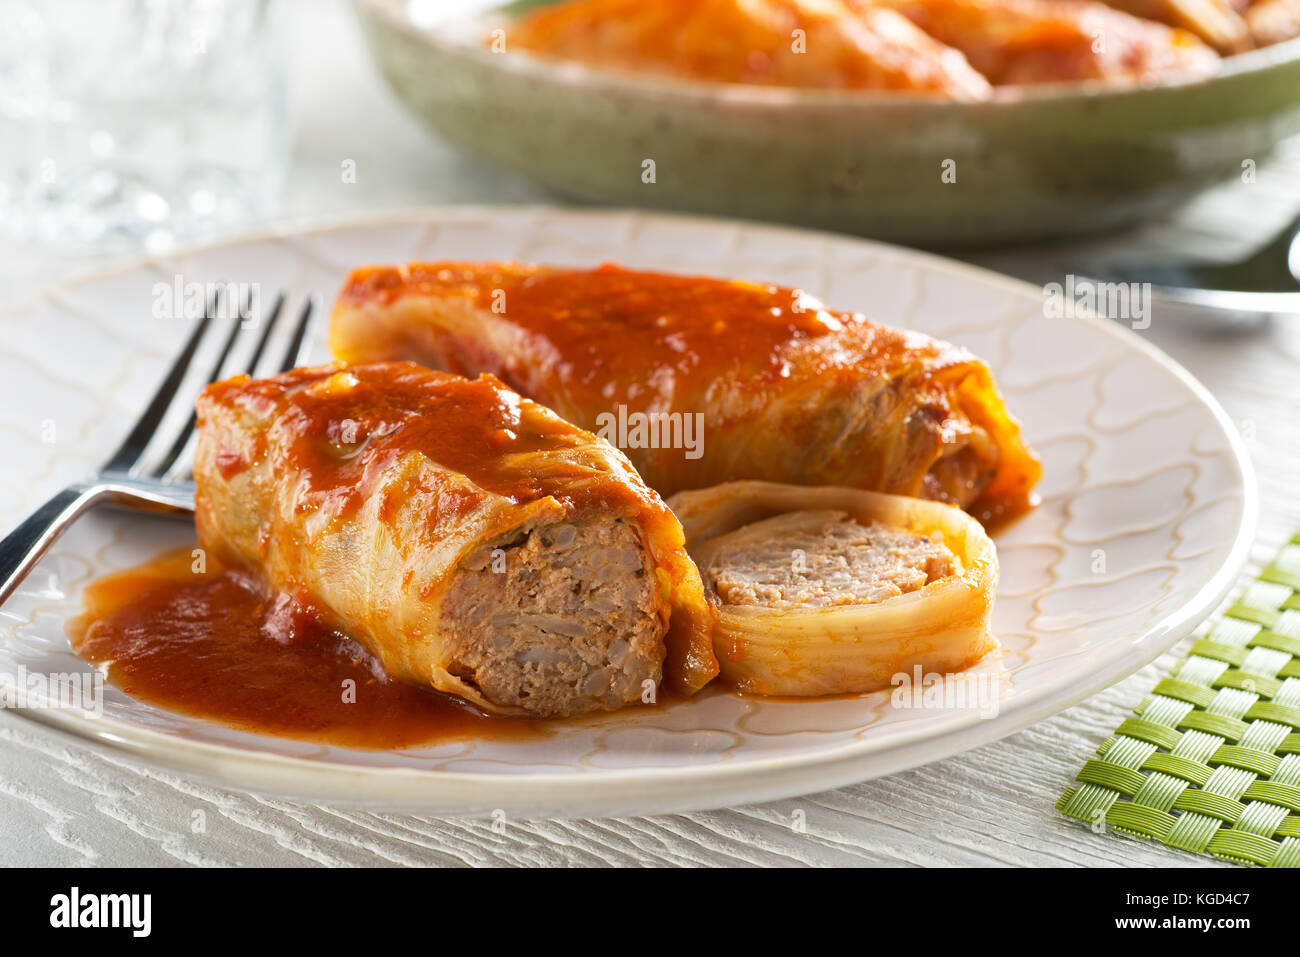 Delicious homemade cabbage rolls with ground pork, rice, and tomato sauce. Stock Photo